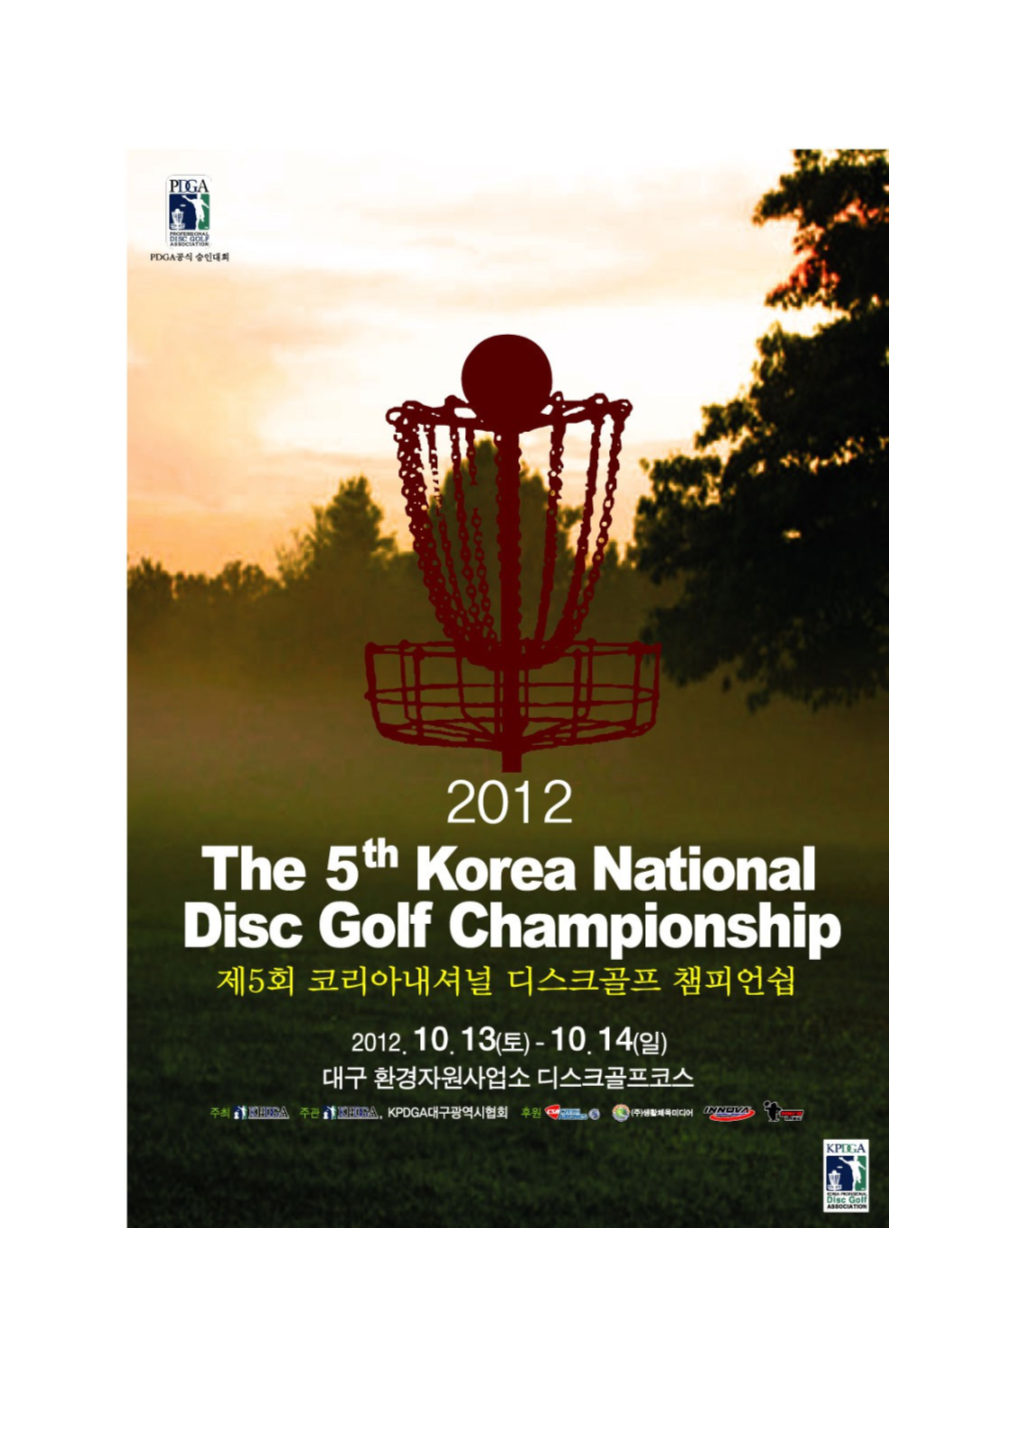 Title: the 5Th Korea National Disc Golf Championship (C-Tier Sanctioned by the PDGA)